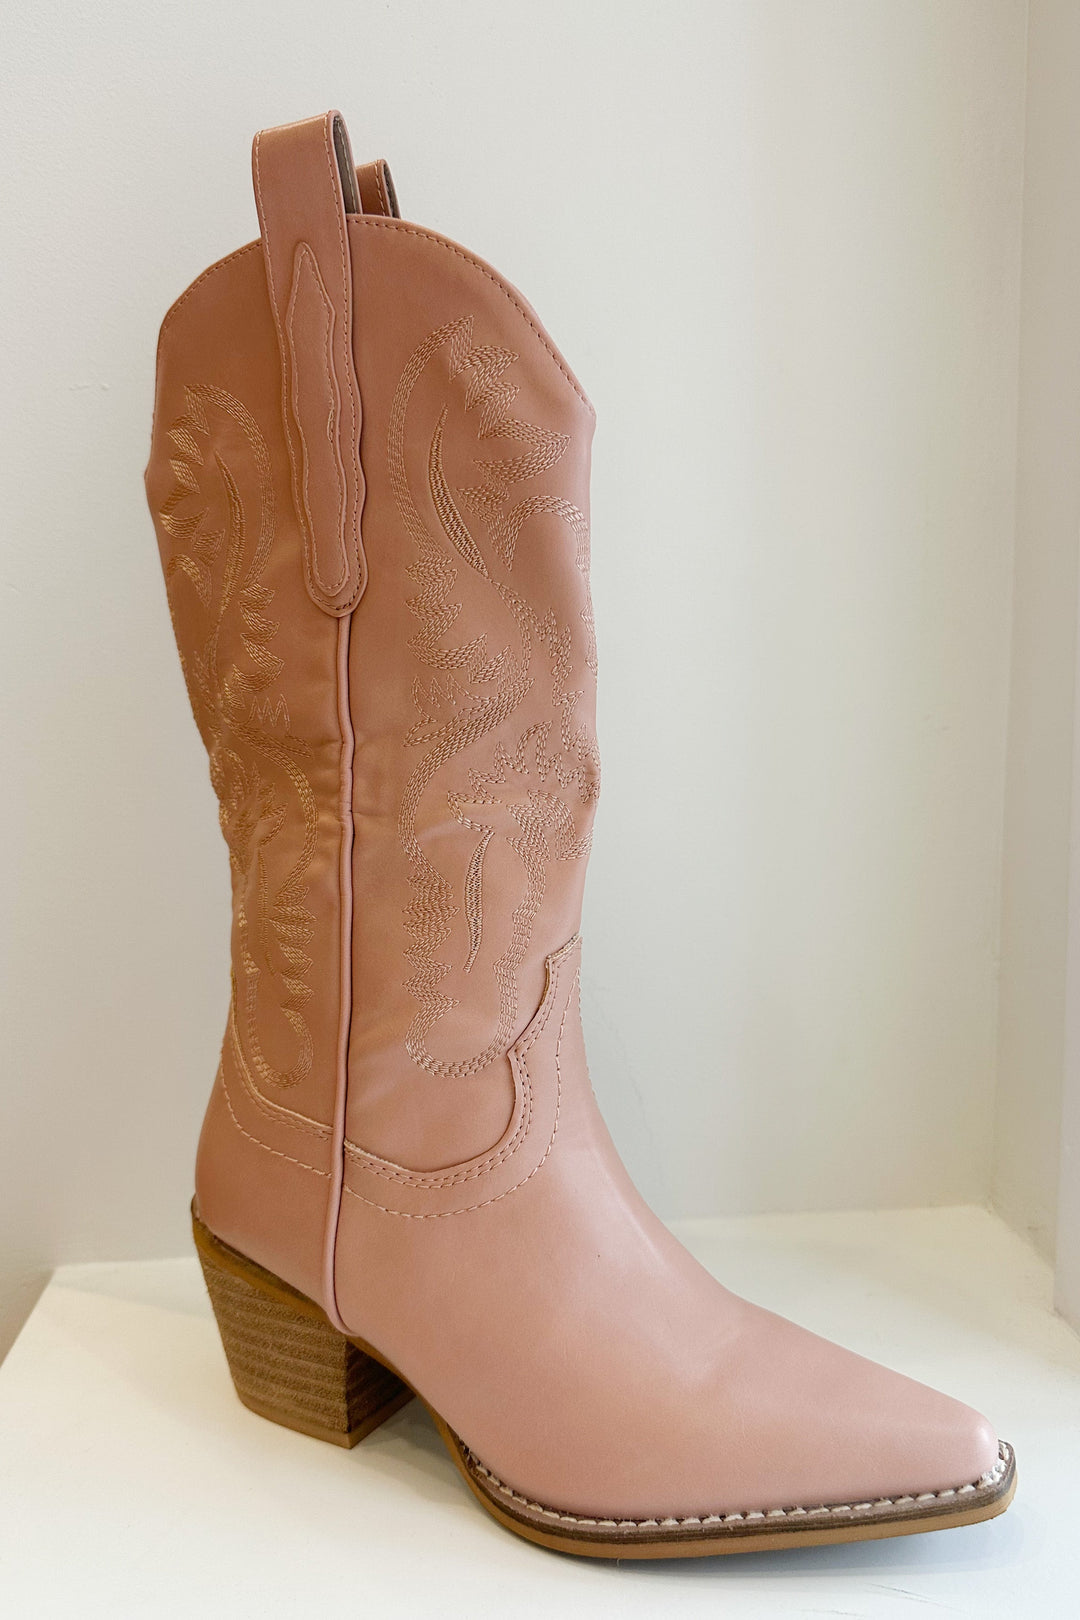 The Kick The Dust Up Blush Cowgirl Boots